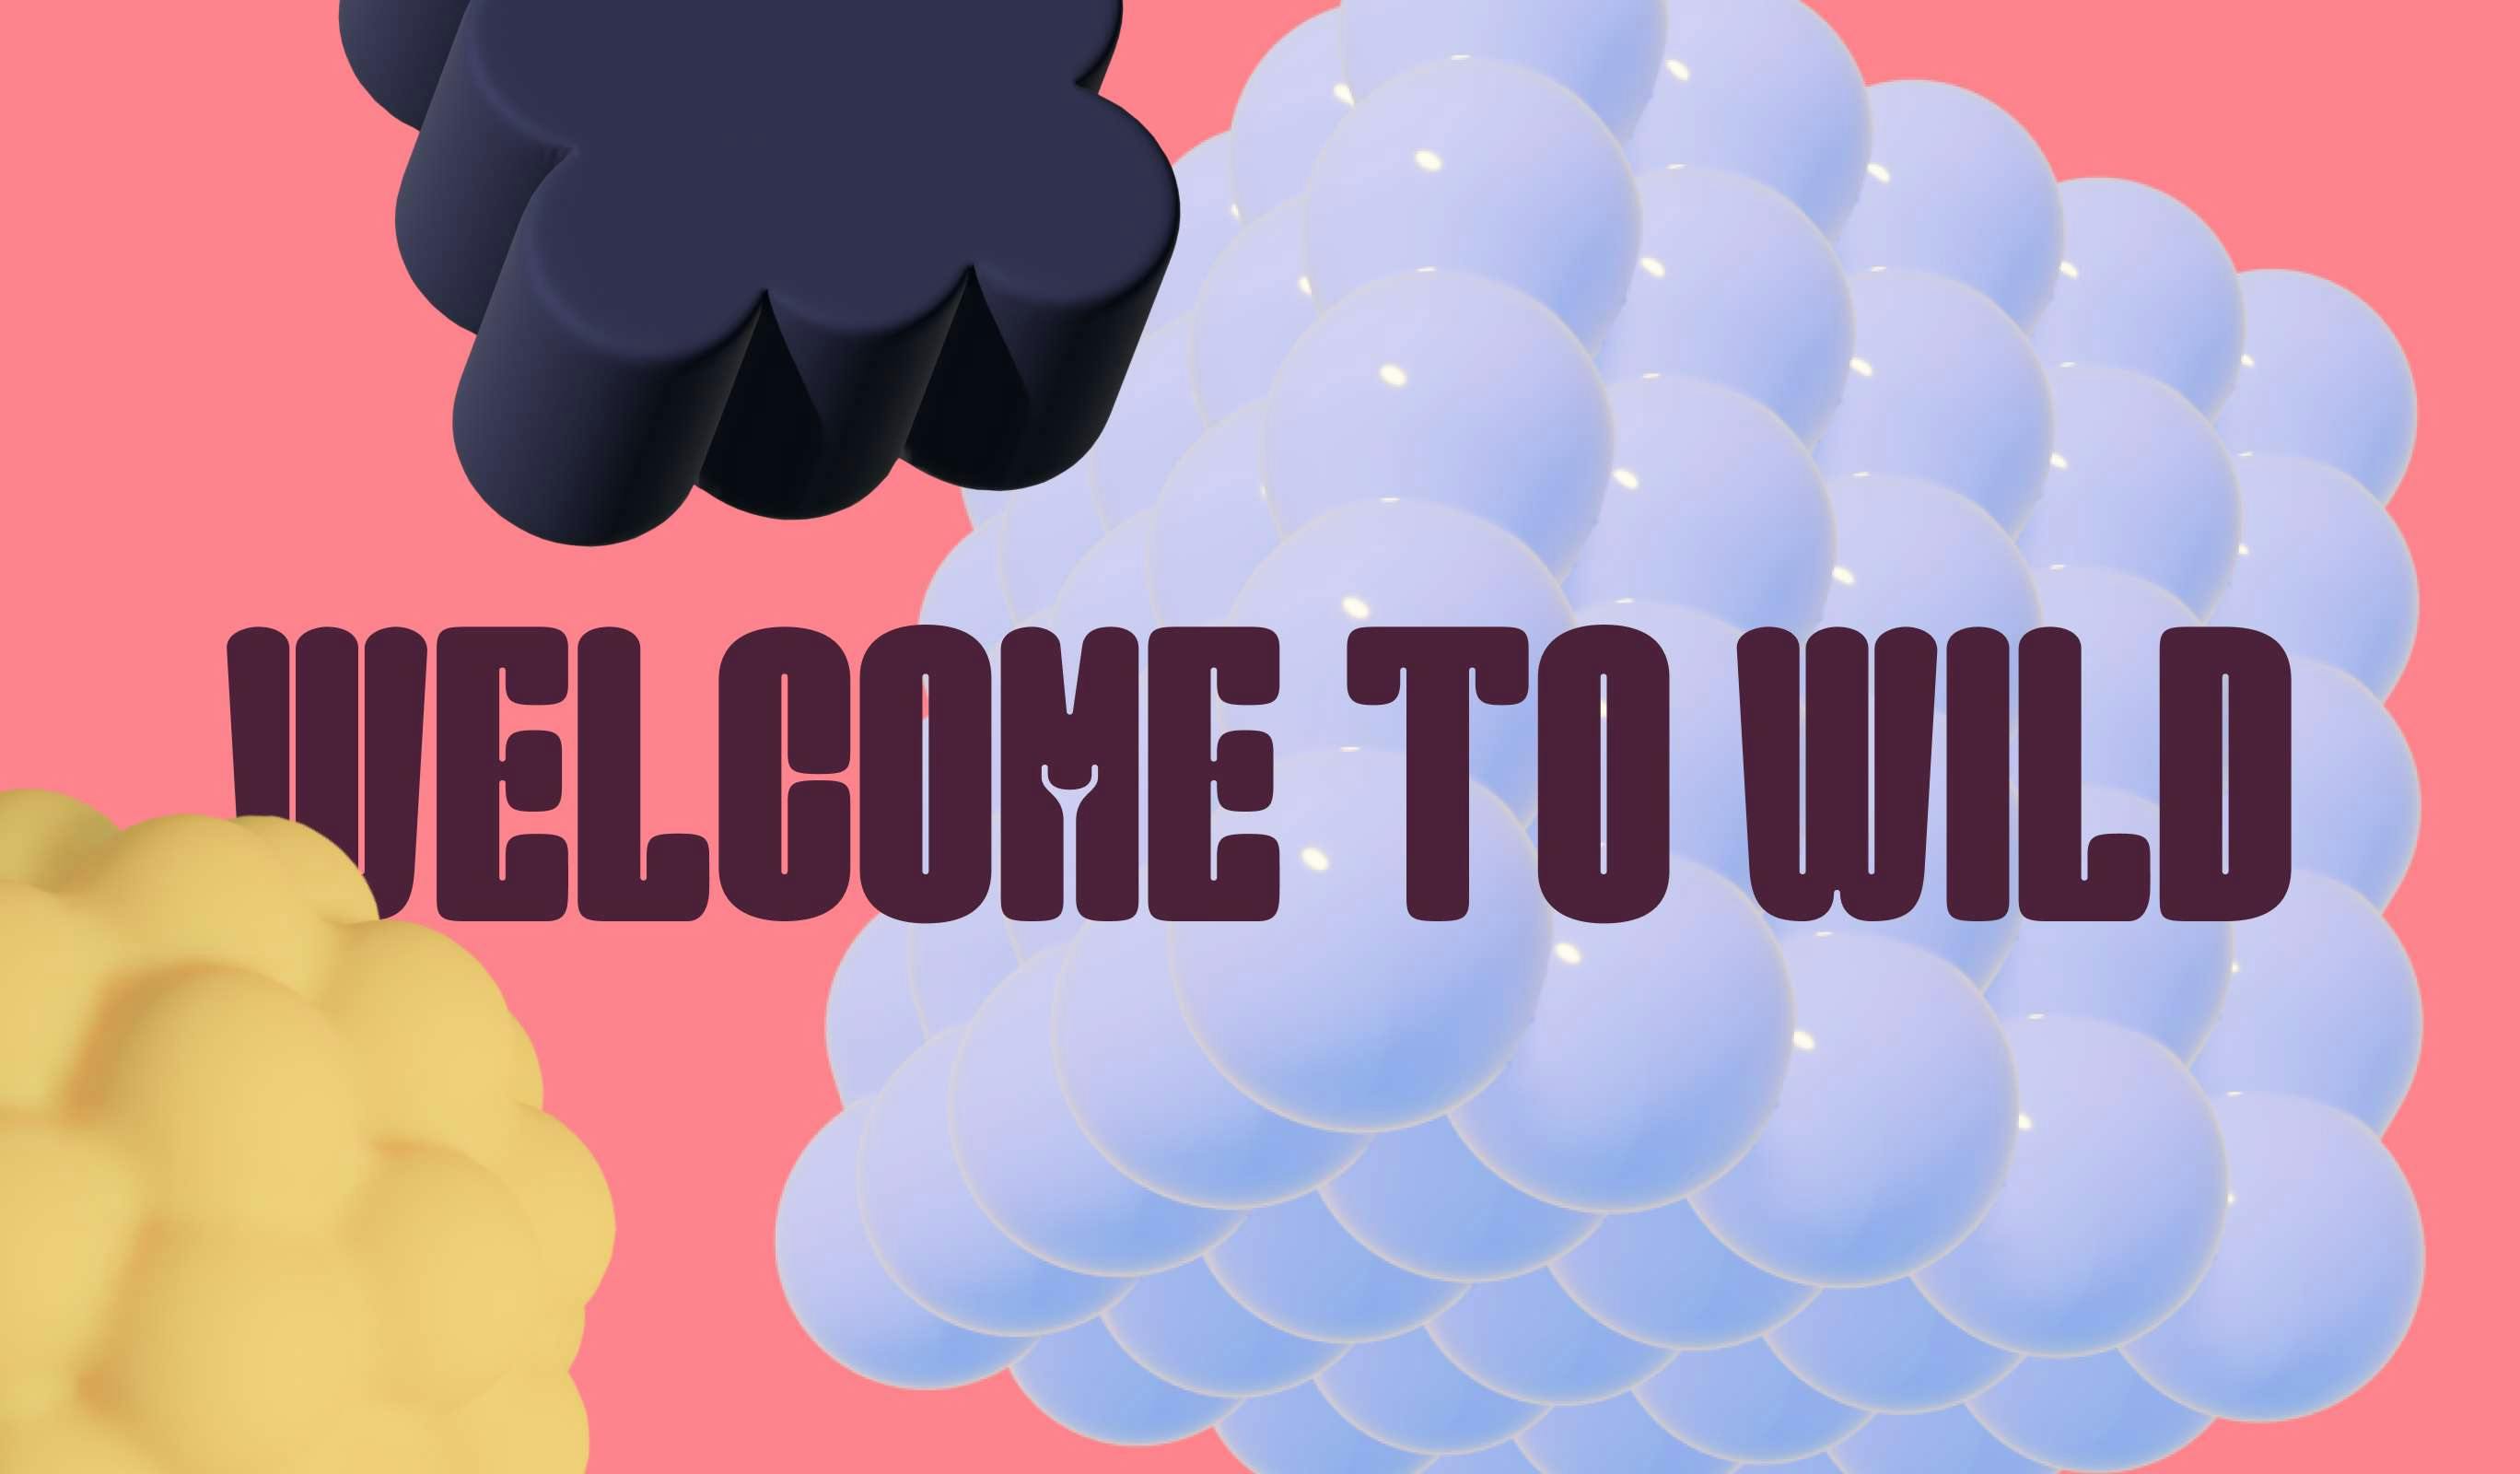 Bubbles with text says Welcome to Wild